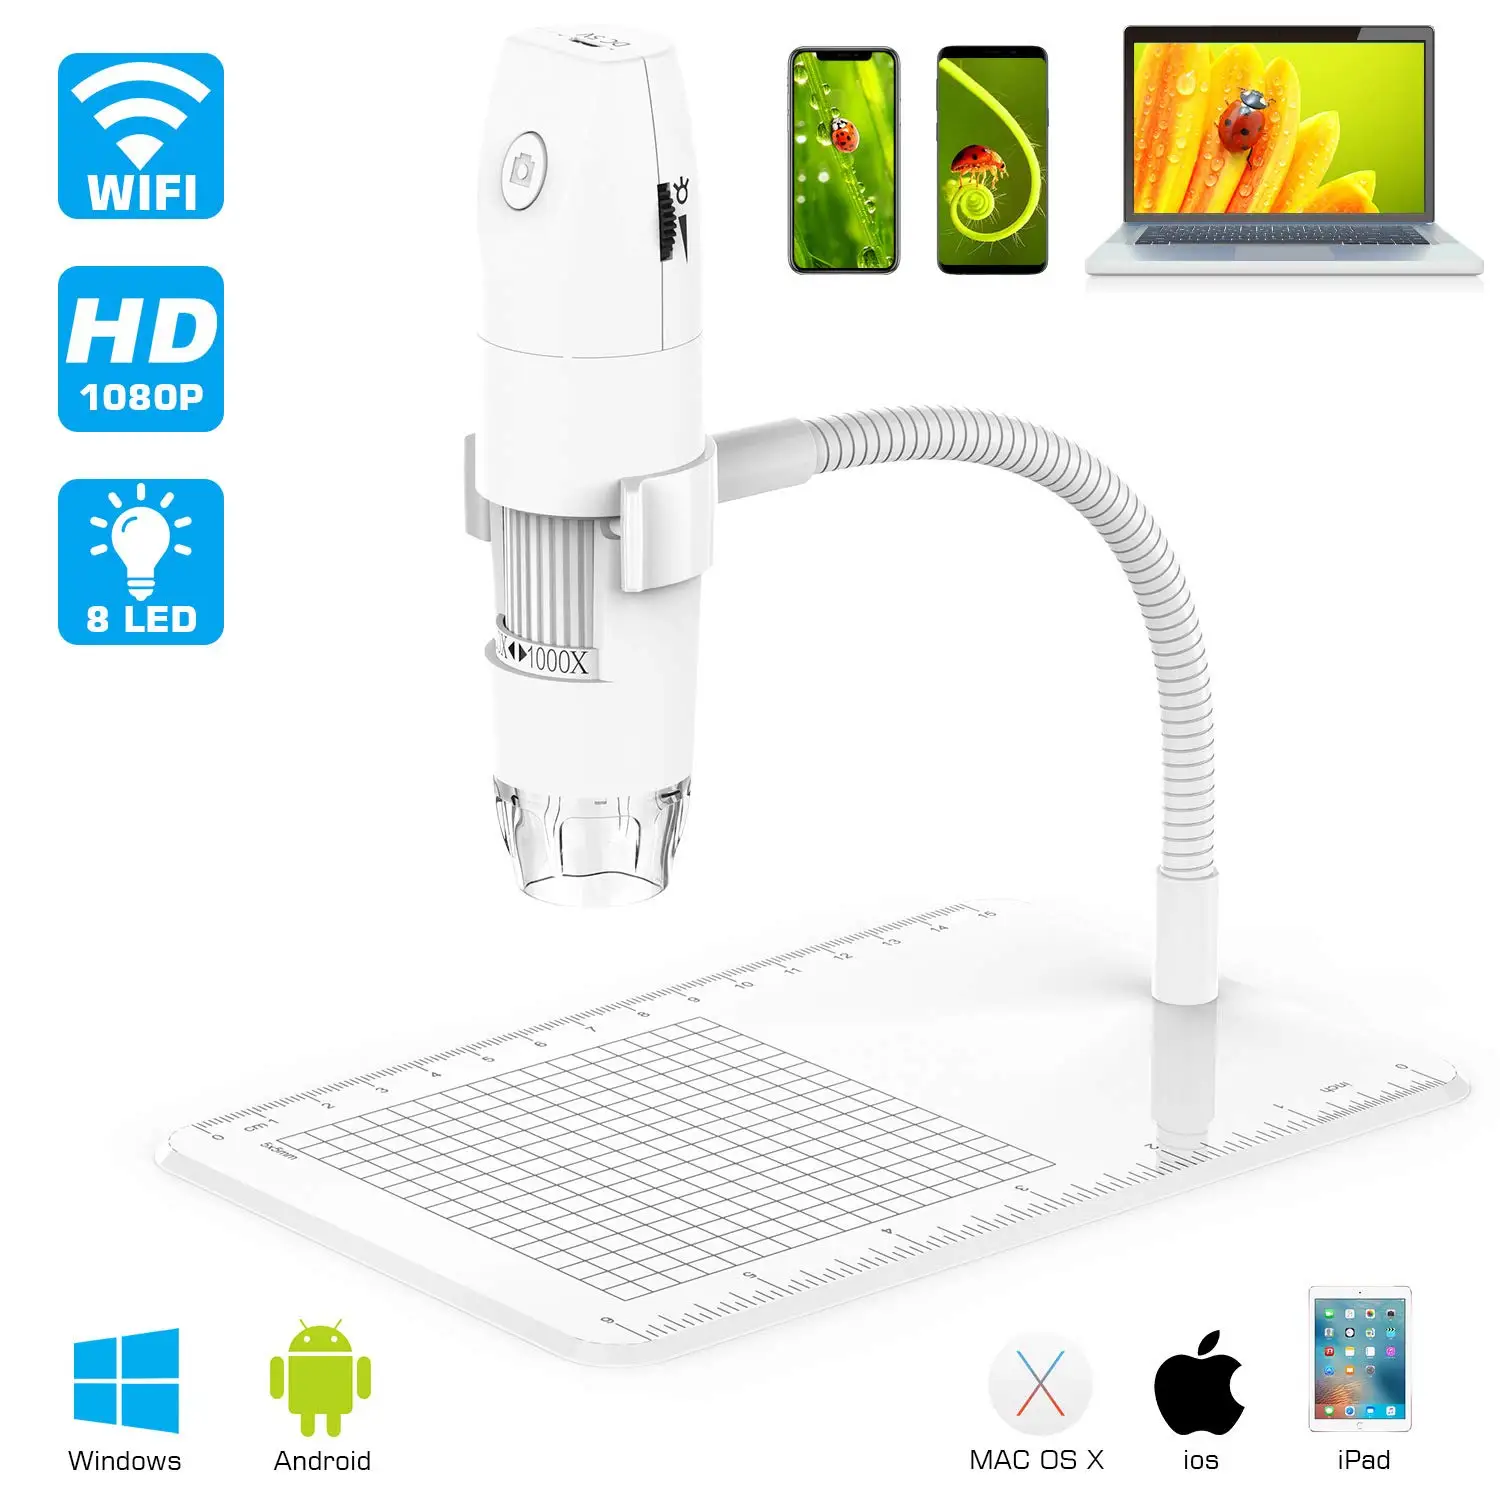 Built-in 8 LED Light for Industry Laboratory with Rotatable Bracket Jingyig Microscope Camera Video Recording WiFi Electric Microscope 